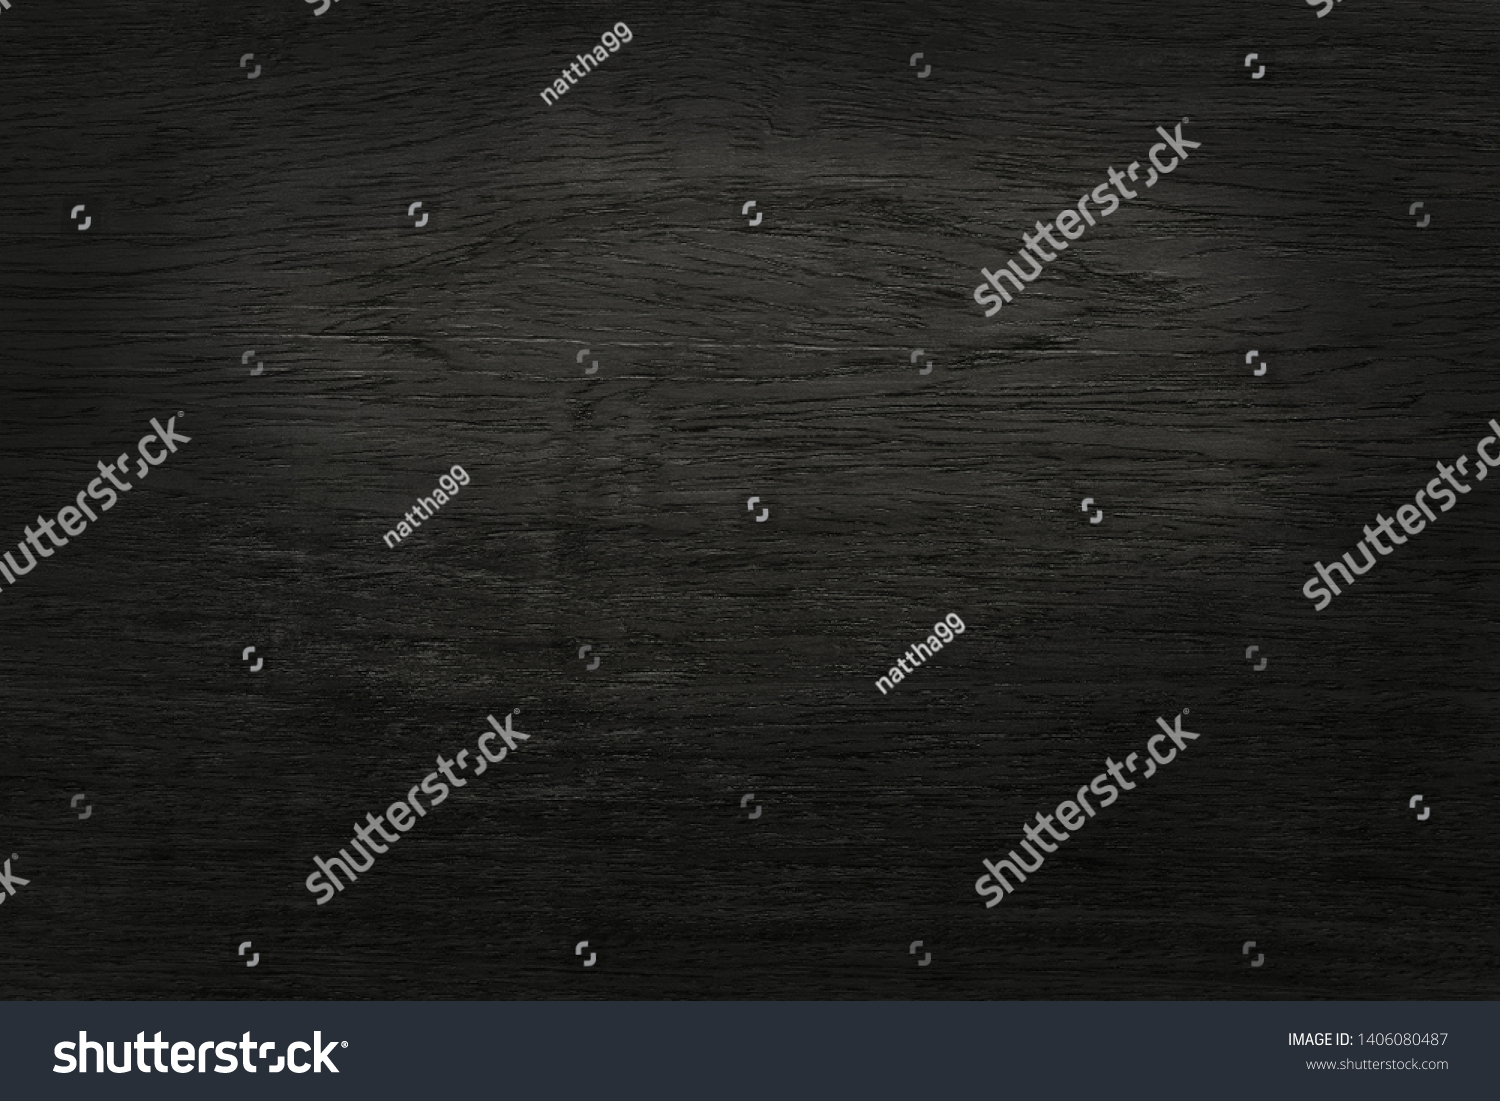 Black wooden wall background, texture of dark bark wood with old natural pattern for design art work, top view of grain timber. #1406080487